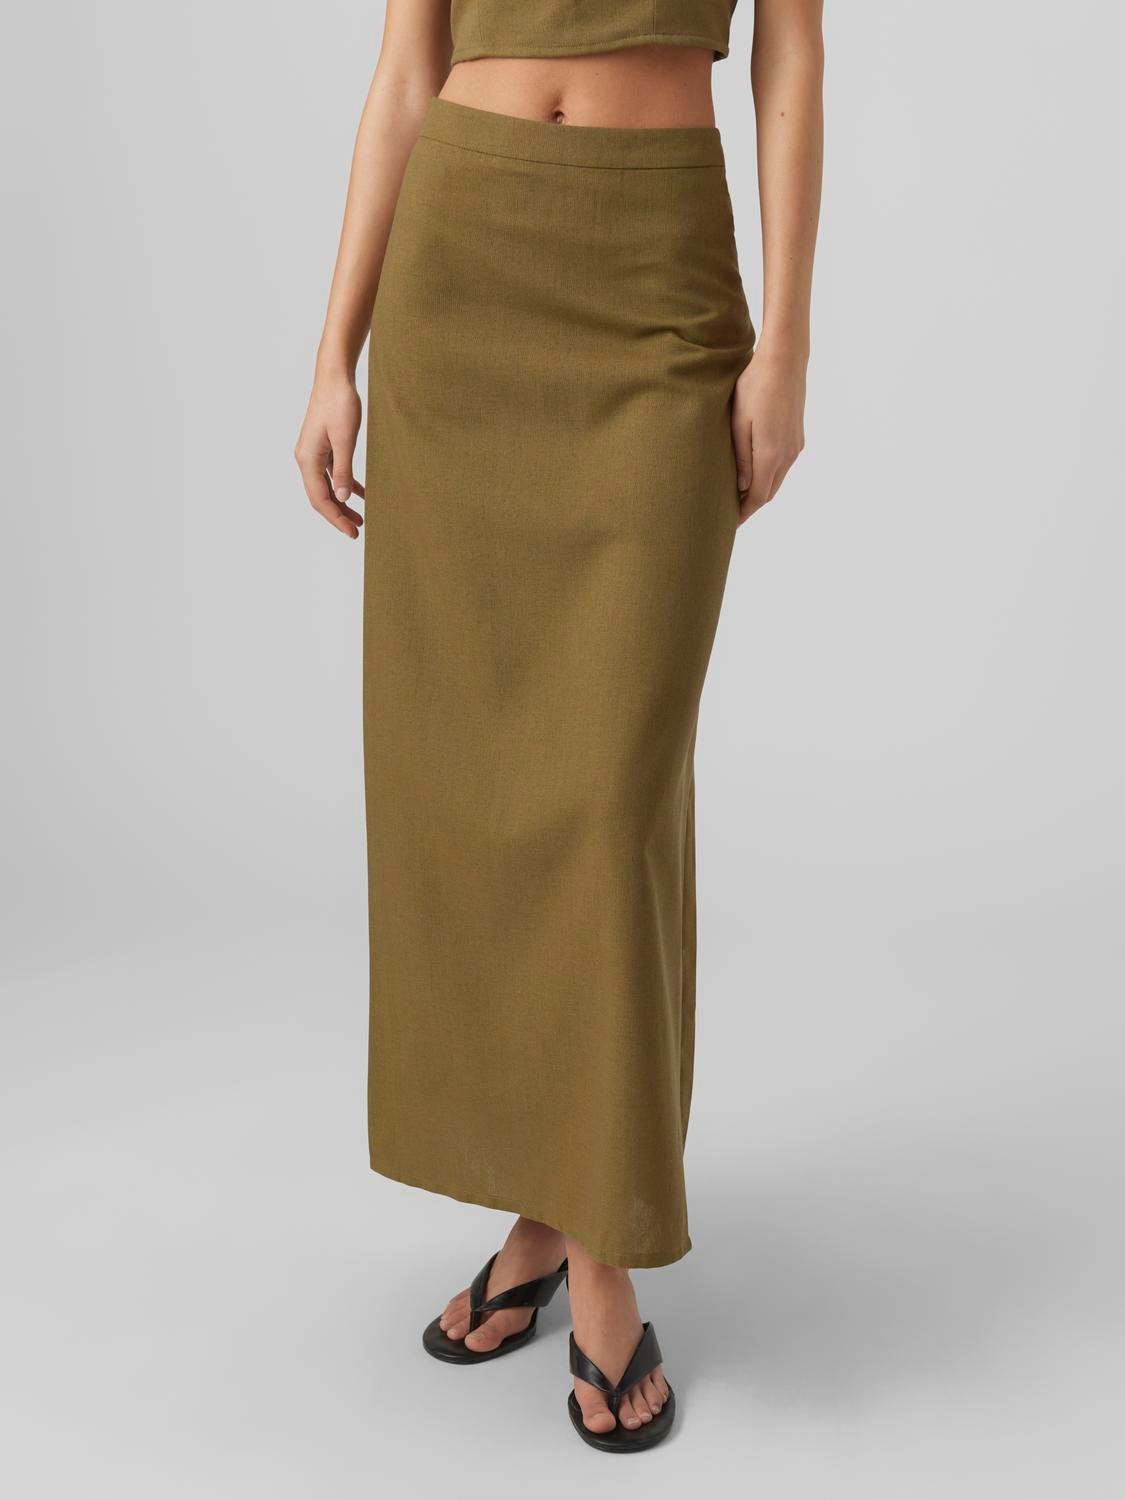 Low Long skirt with discount! |